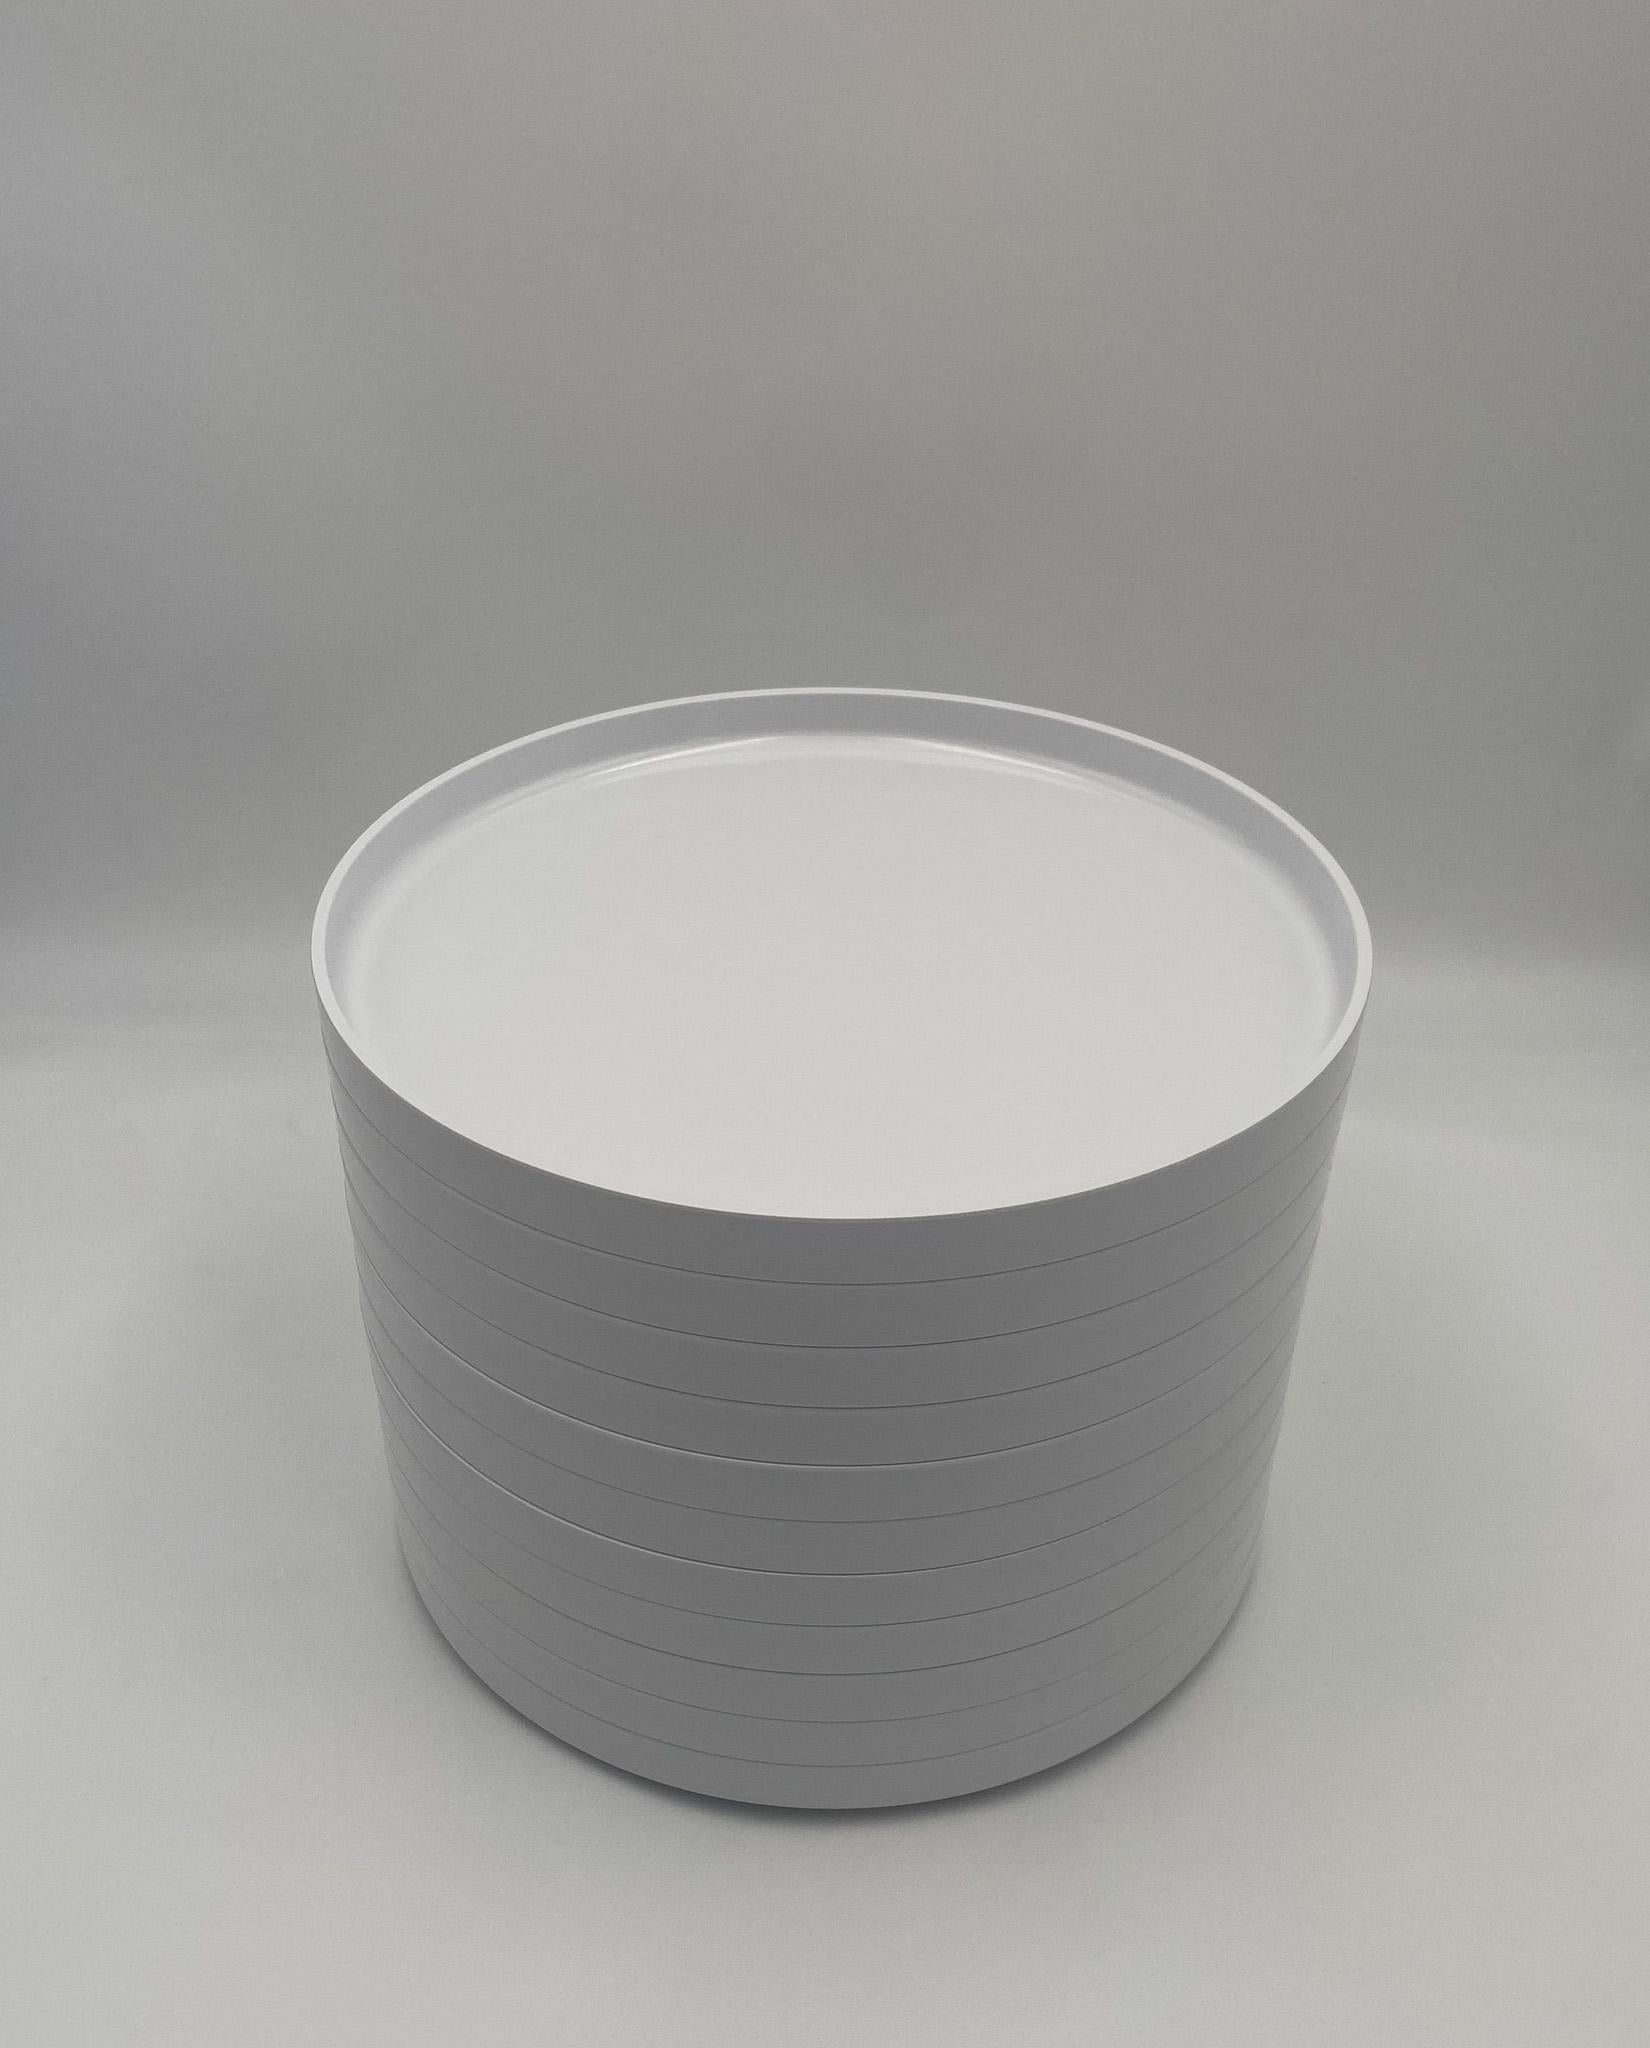 Massimo Vignelli Stackable Dinnerware for Heller ( 33 pieces ), USA, c.1980 1